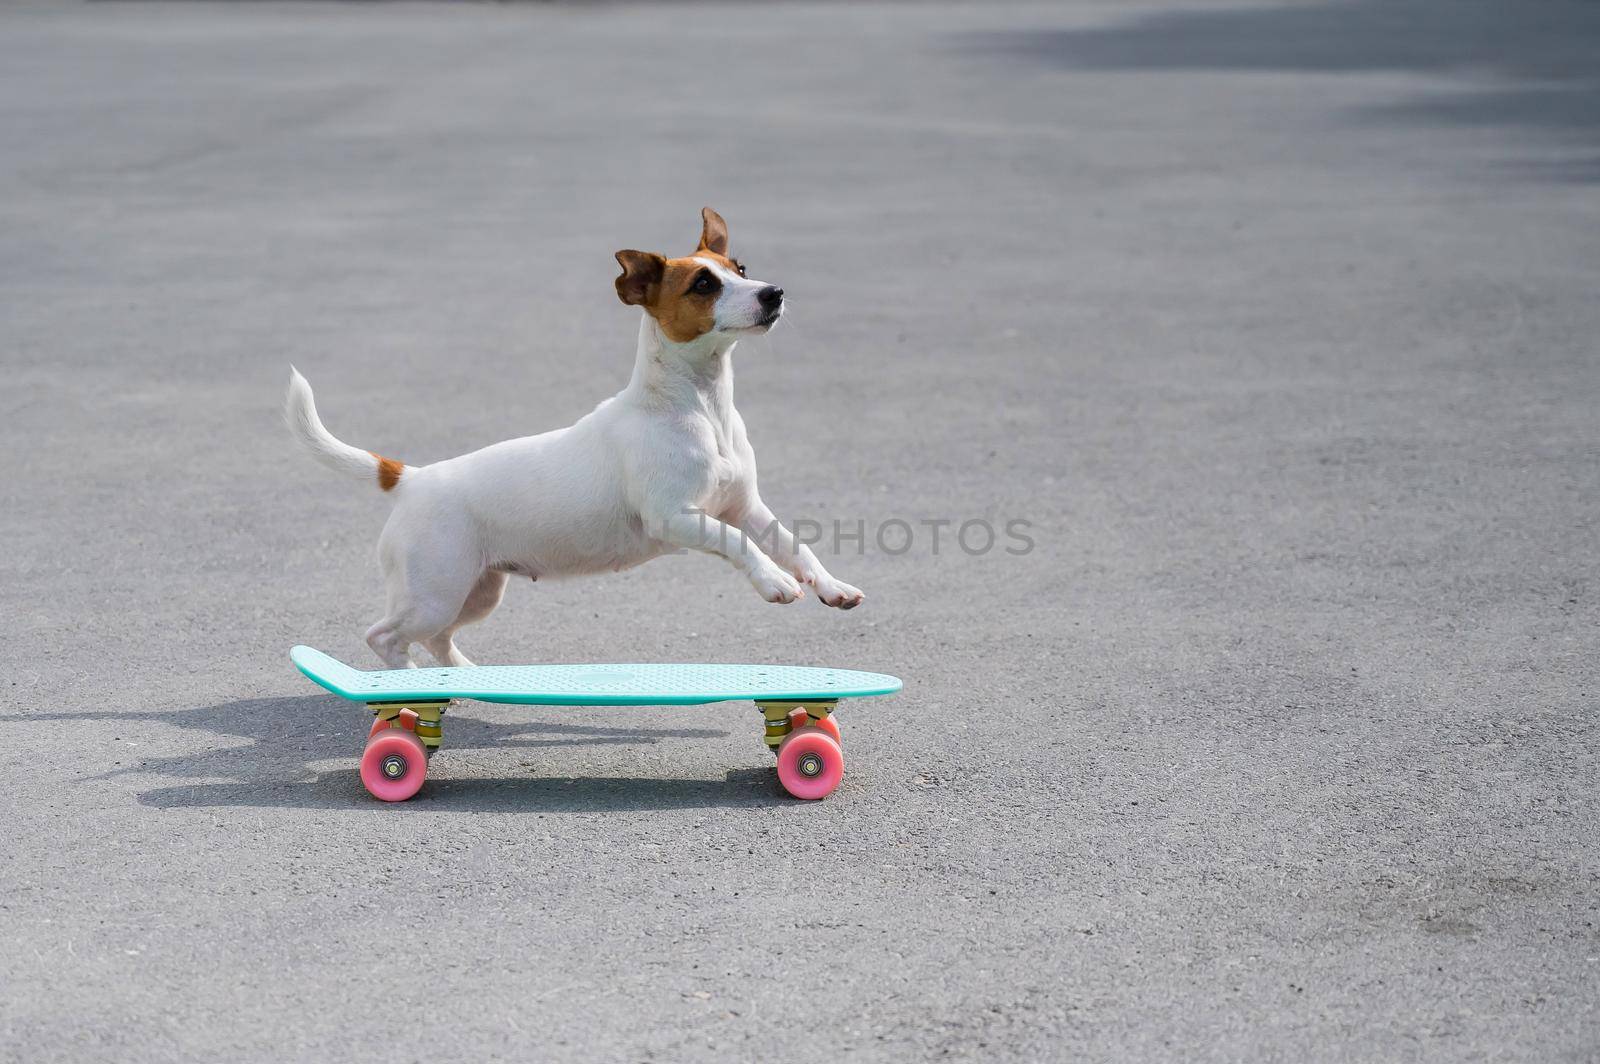 The dog rides a penny board outdoors. Jack russell terrier performing tricks on a skateboard.